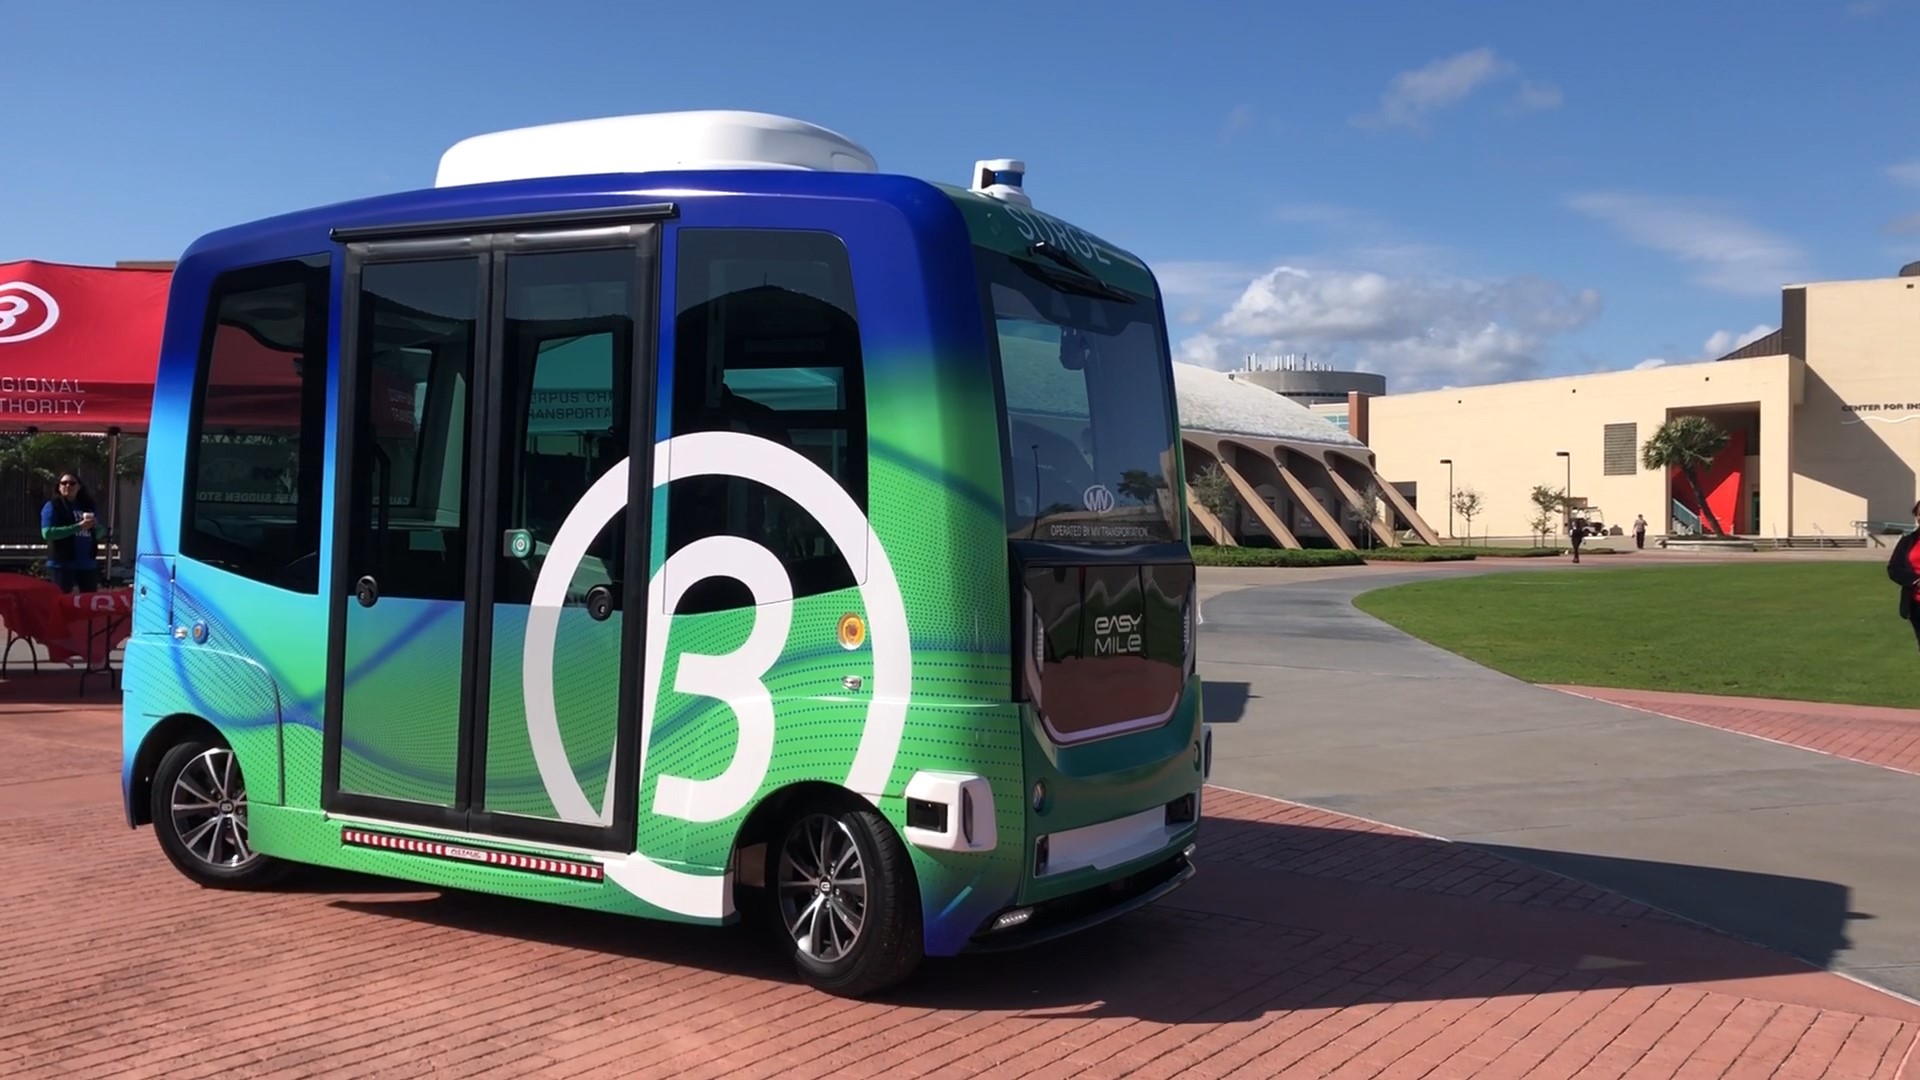 Students at Texas A&M University-Corpus Christi will have a new way to get around campus with the unveiling of the new autonomous shuttle.